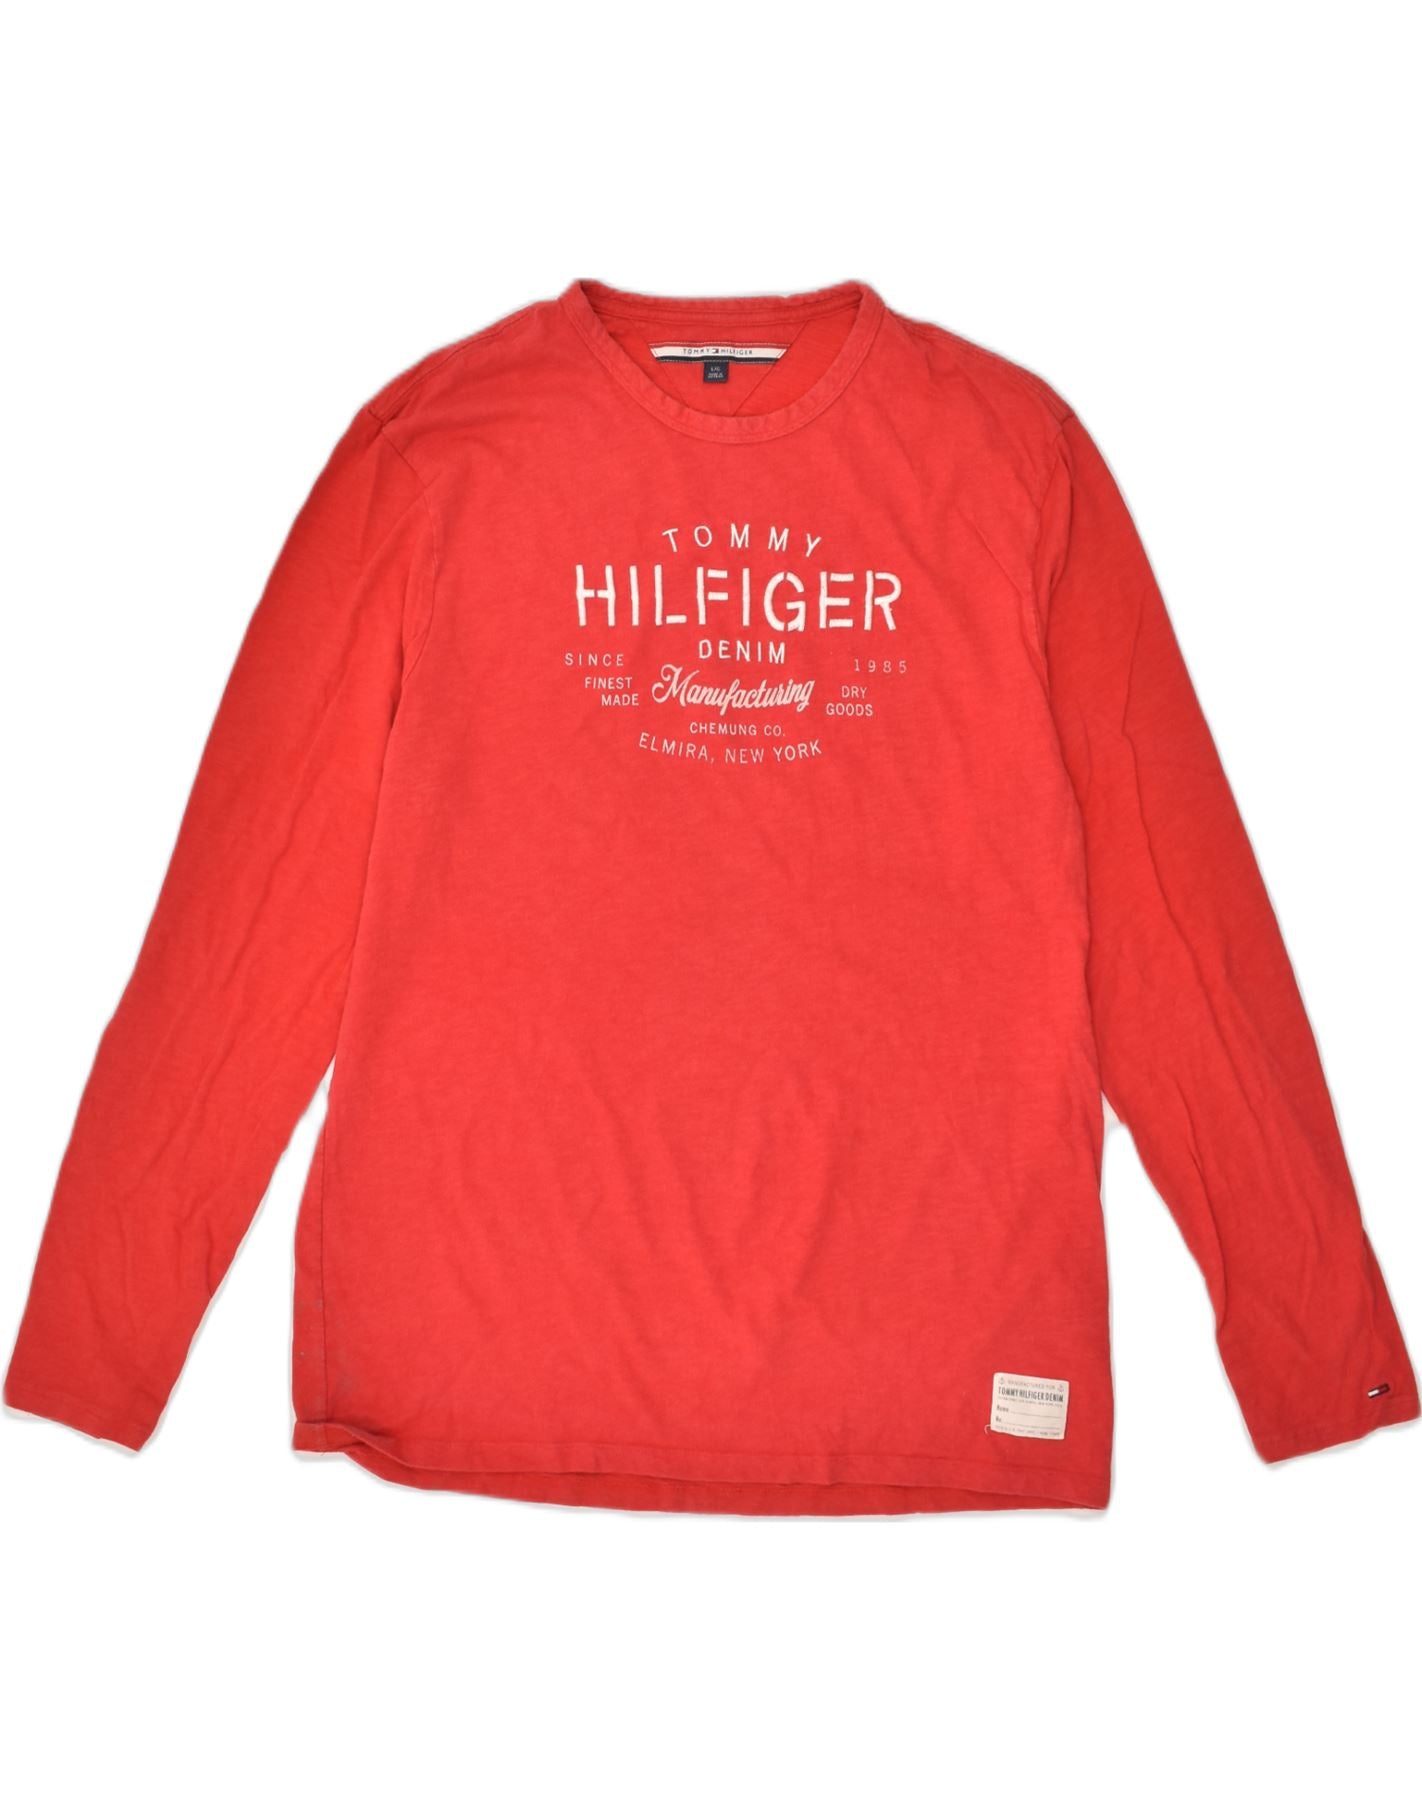 TOMMY HILFIGER Womens Graphic Top Long Sleeve UK 16 Large Red